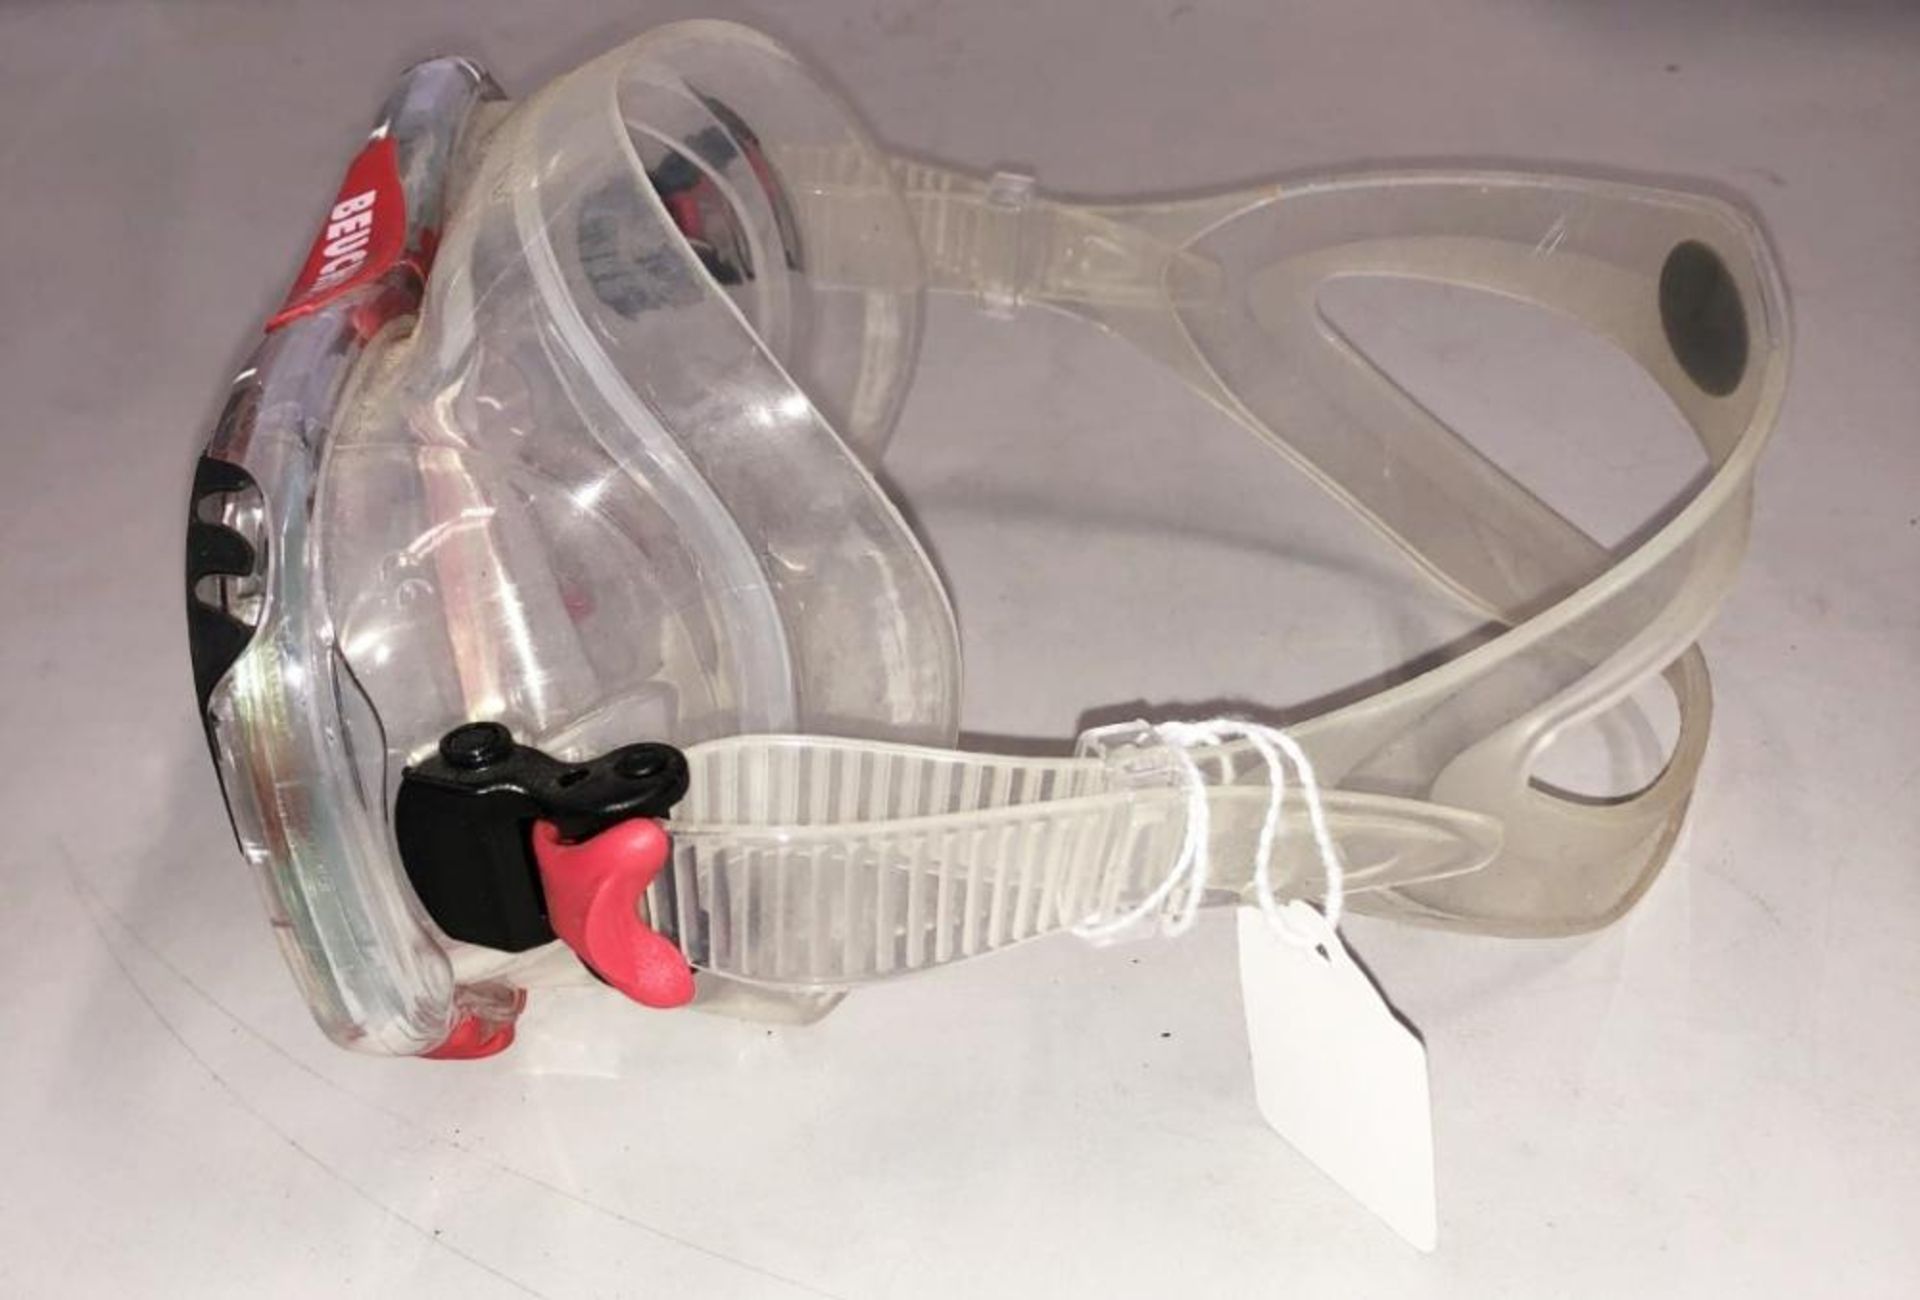 6 x New Branded Diving Masks - CL349 - Altrincham WA14 - Total RRP £187.44 - Image 6 of 20